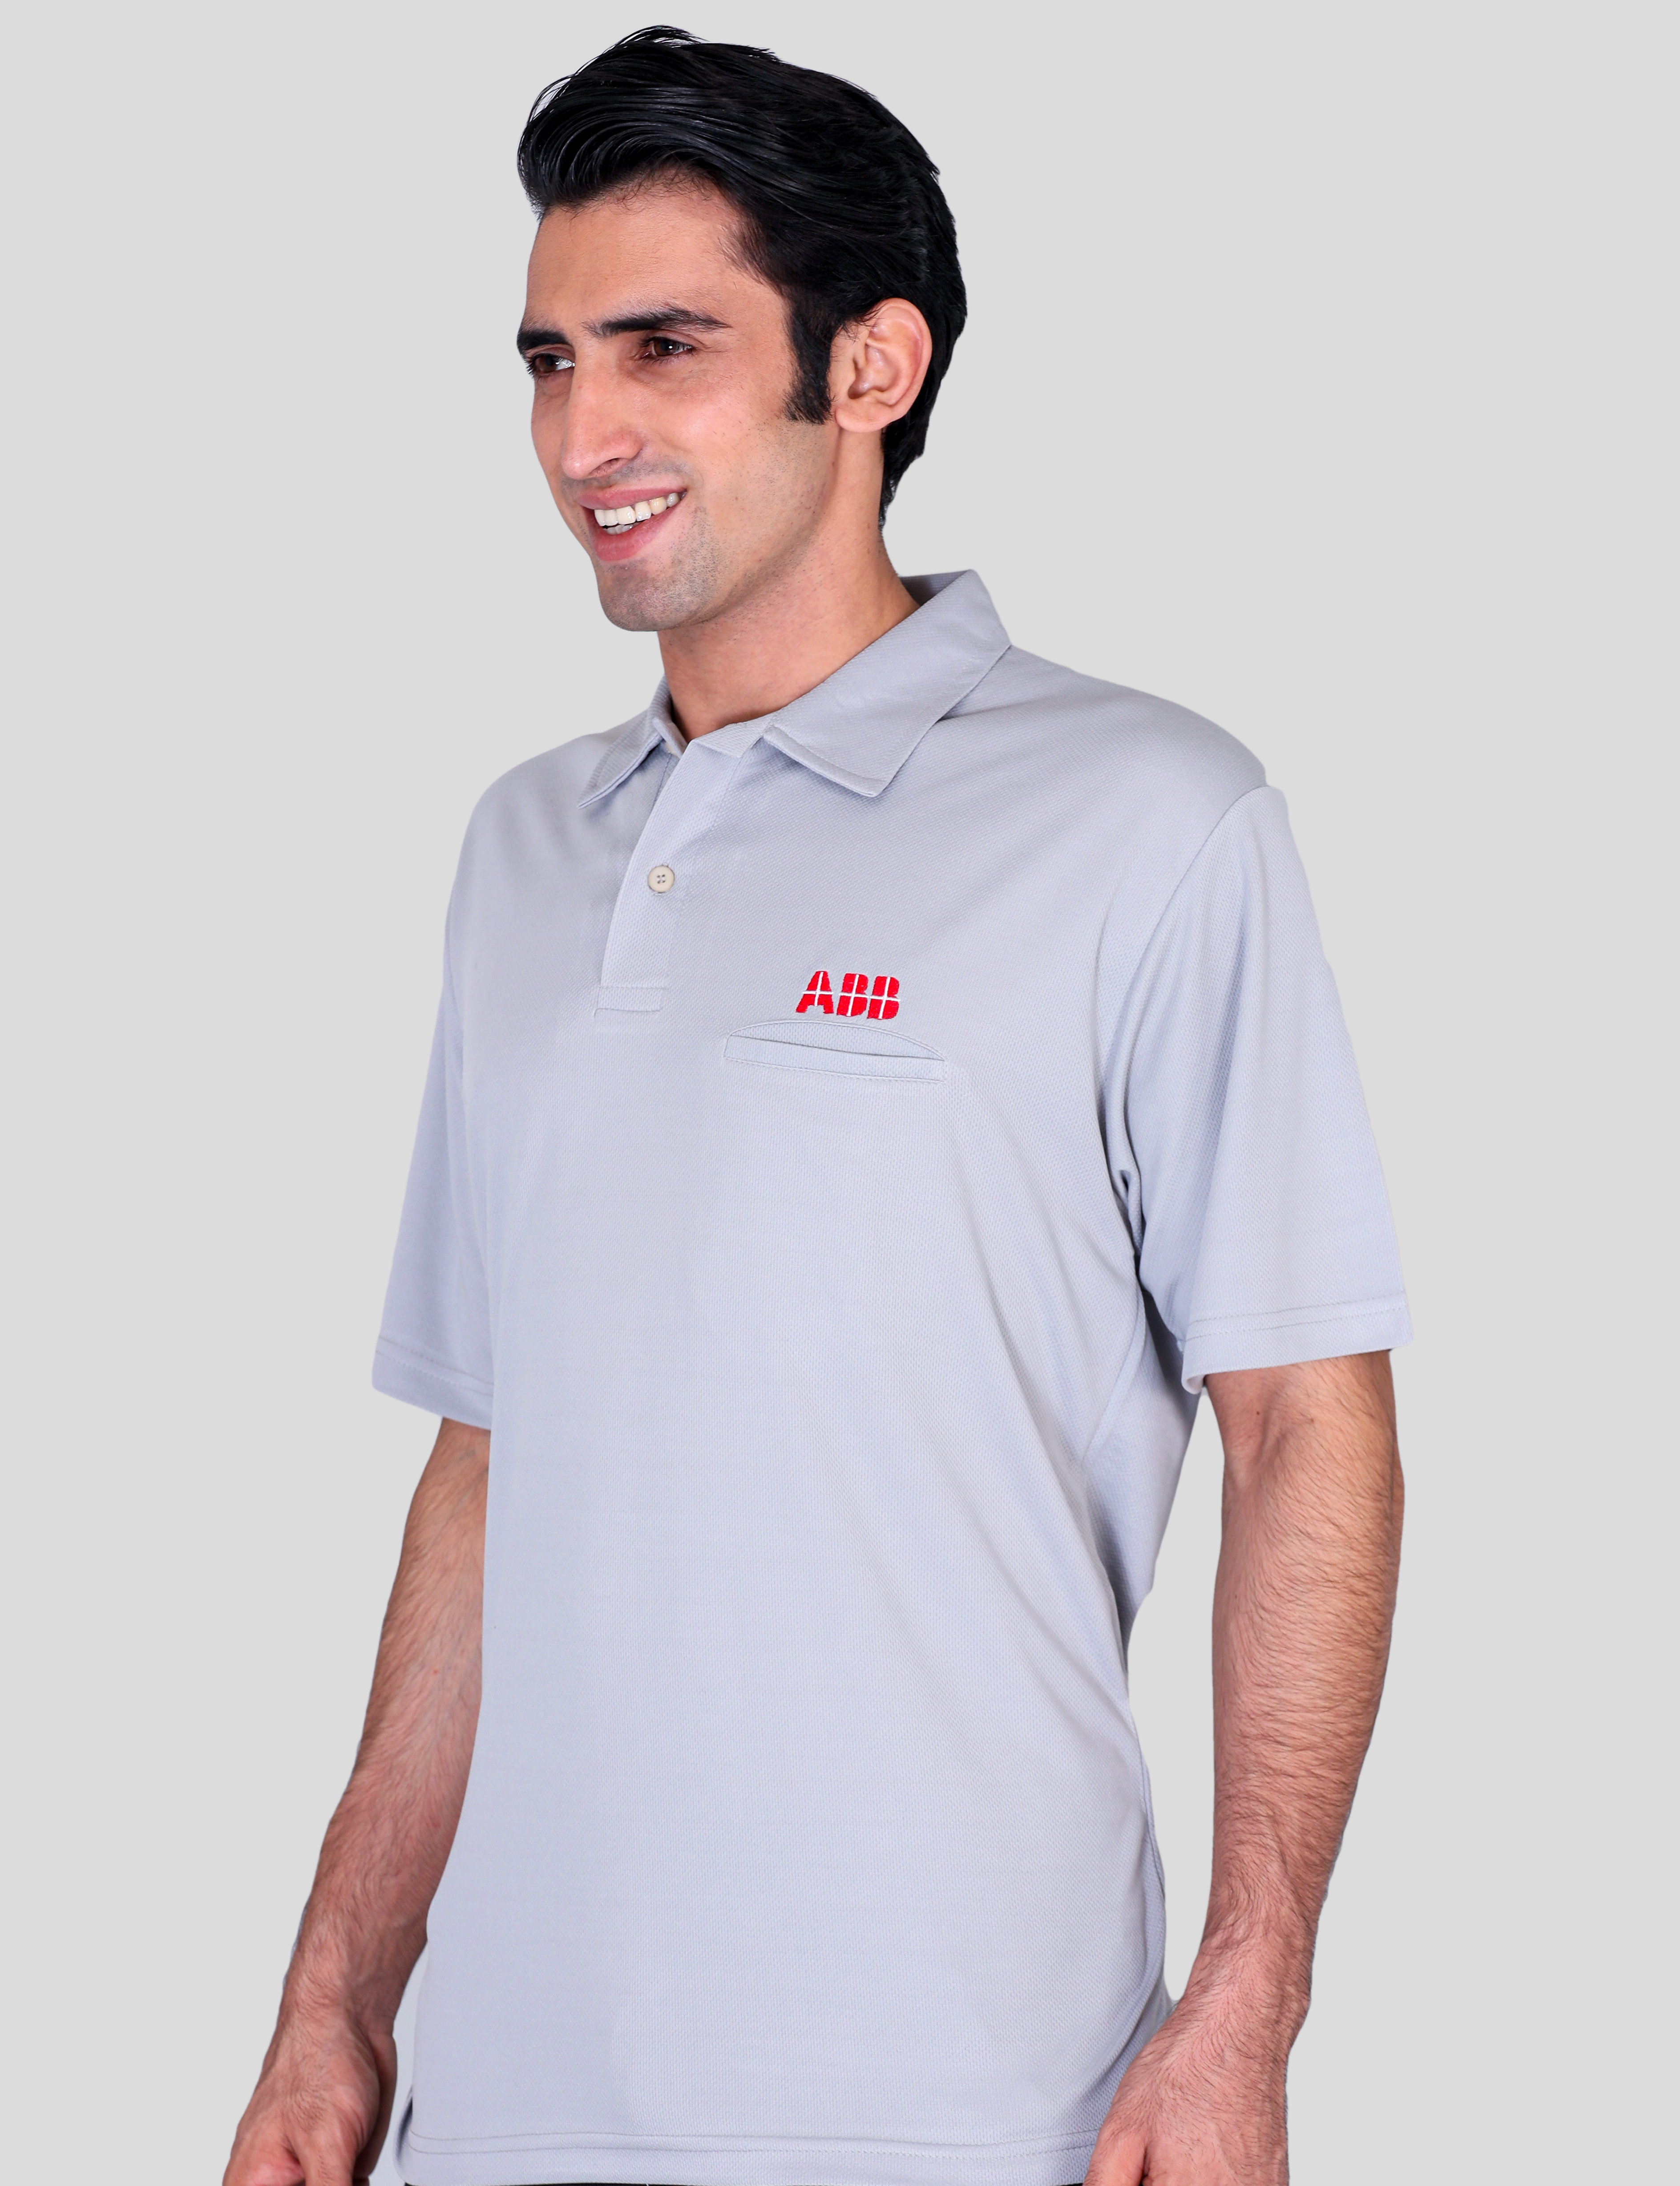 Abb steel grey dry fits t-shirts with company logo